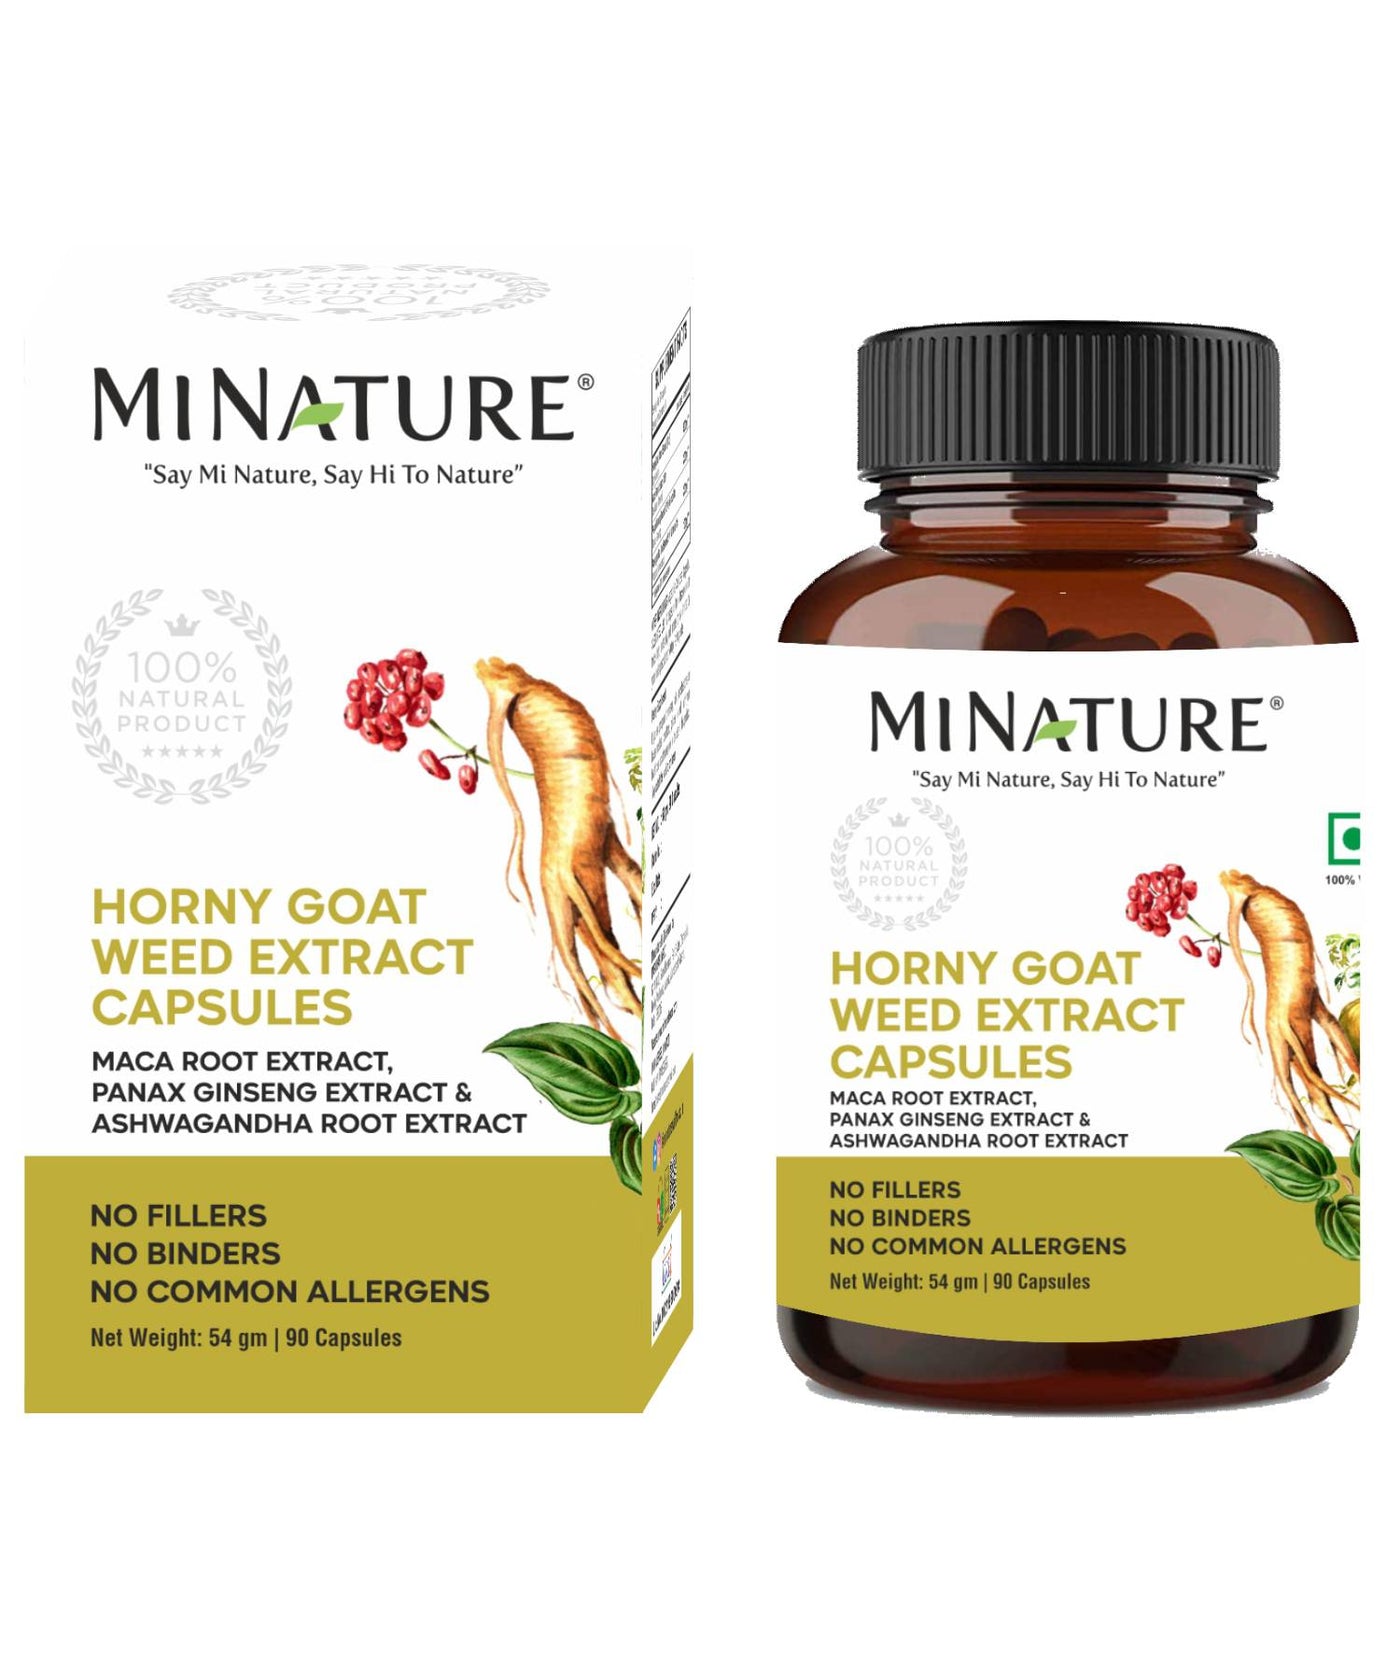 Horny Goat Weed Extract Capsules 500mg | 90 Veg Caps